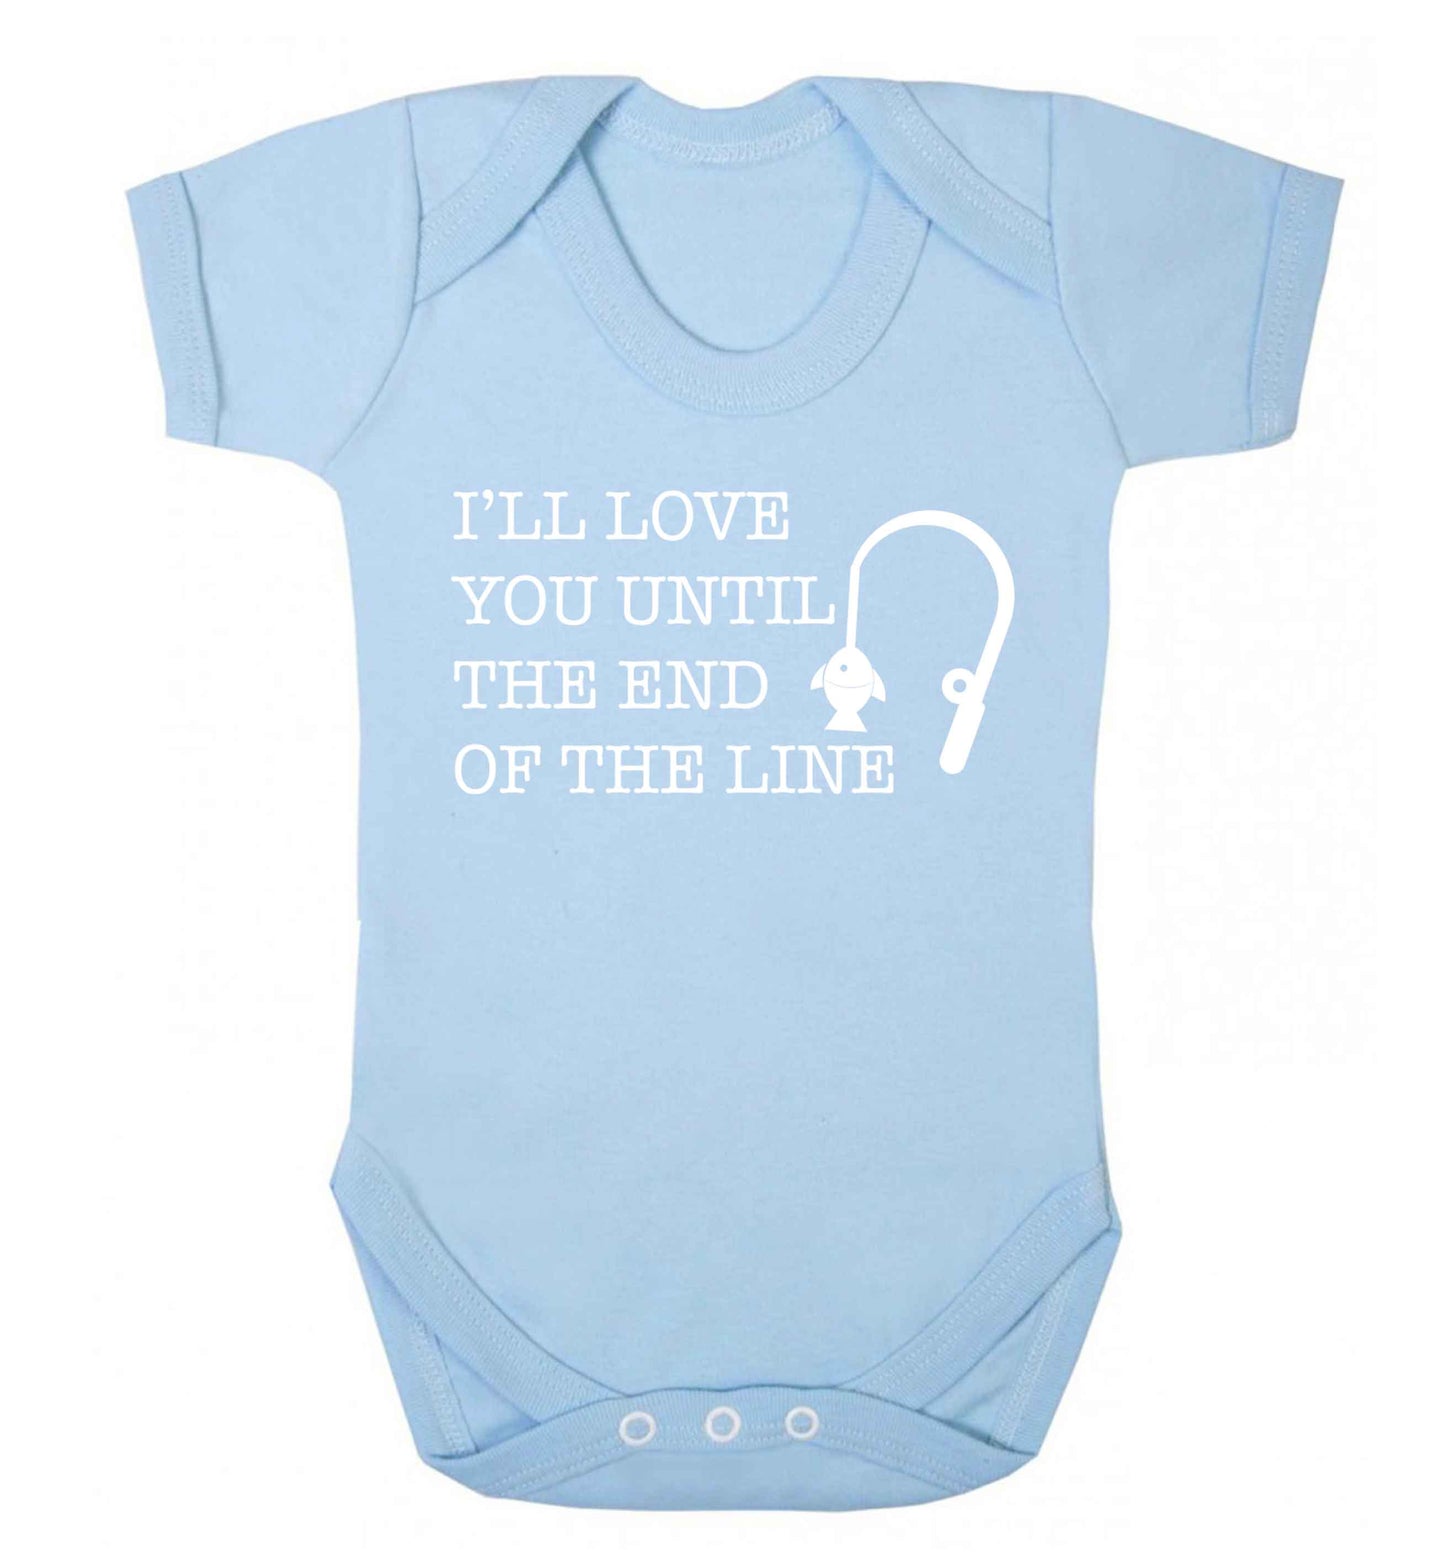 I'll love you until the end of the line Baby Vest pale blue 18-24 months